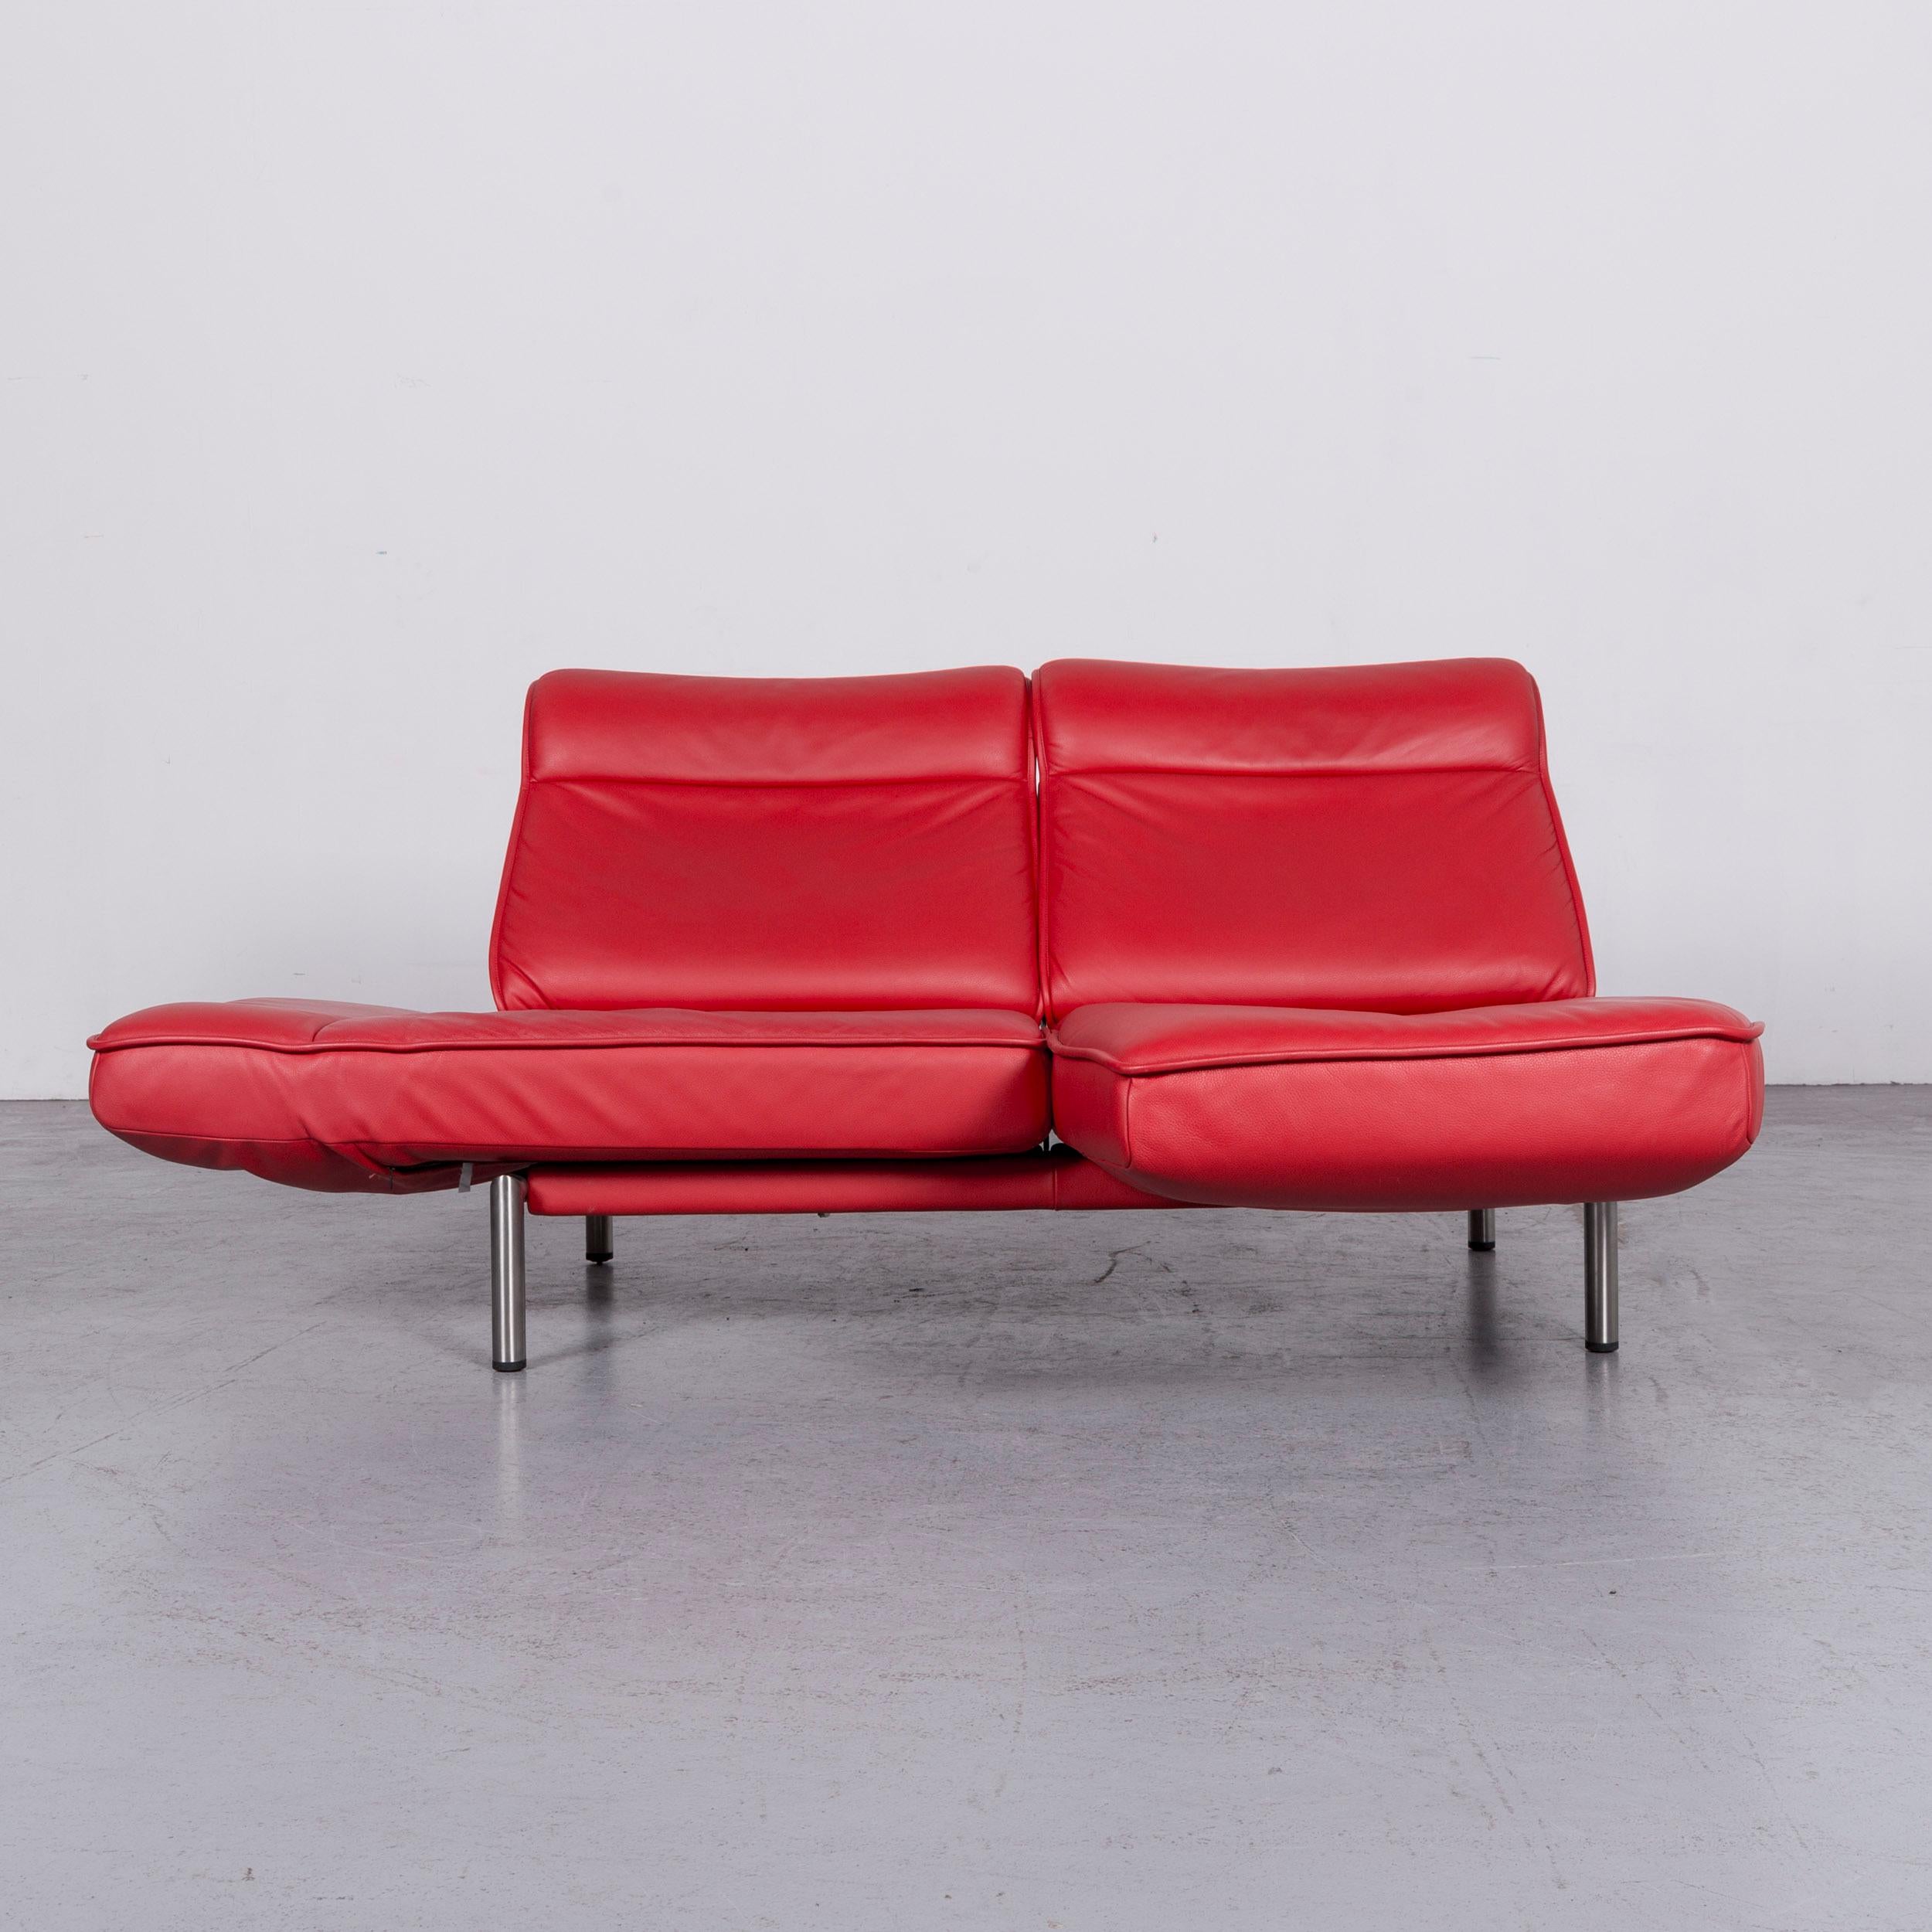 Contemporary De Sede DS 450 Designer Sofa Red Leather Three-Seat Couch Made in Switzerland For Sale